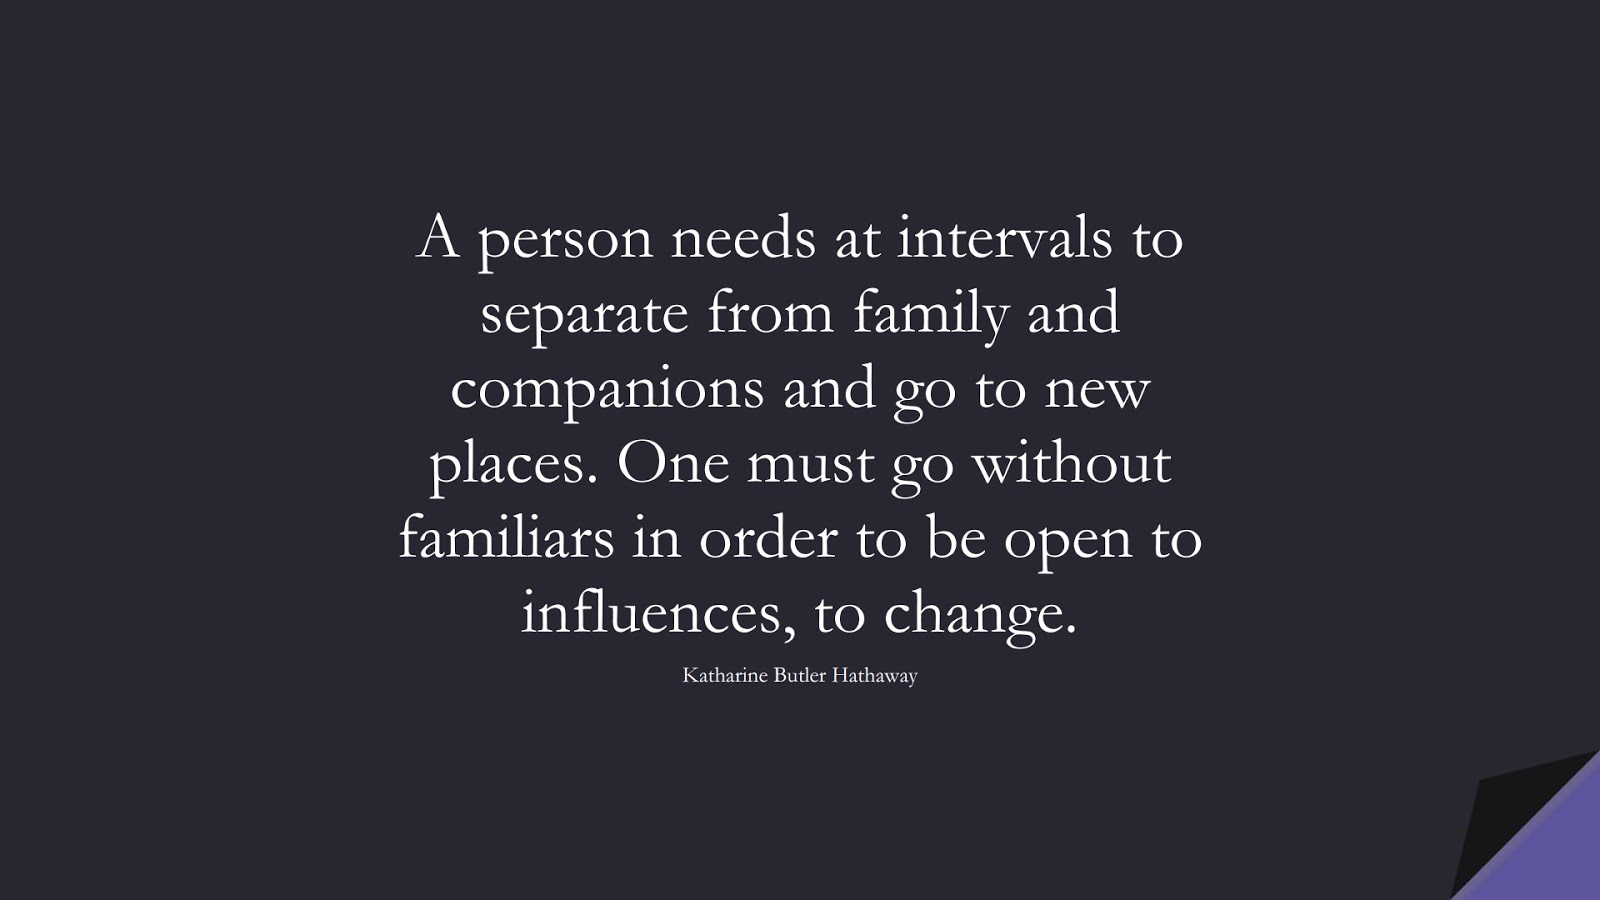 A person needs at intervals to separate from family and companions and go to new places. One must go without familiars in order to be open to influences, to change. (Katharine Butler Hathaway);  #ChangeQuotes